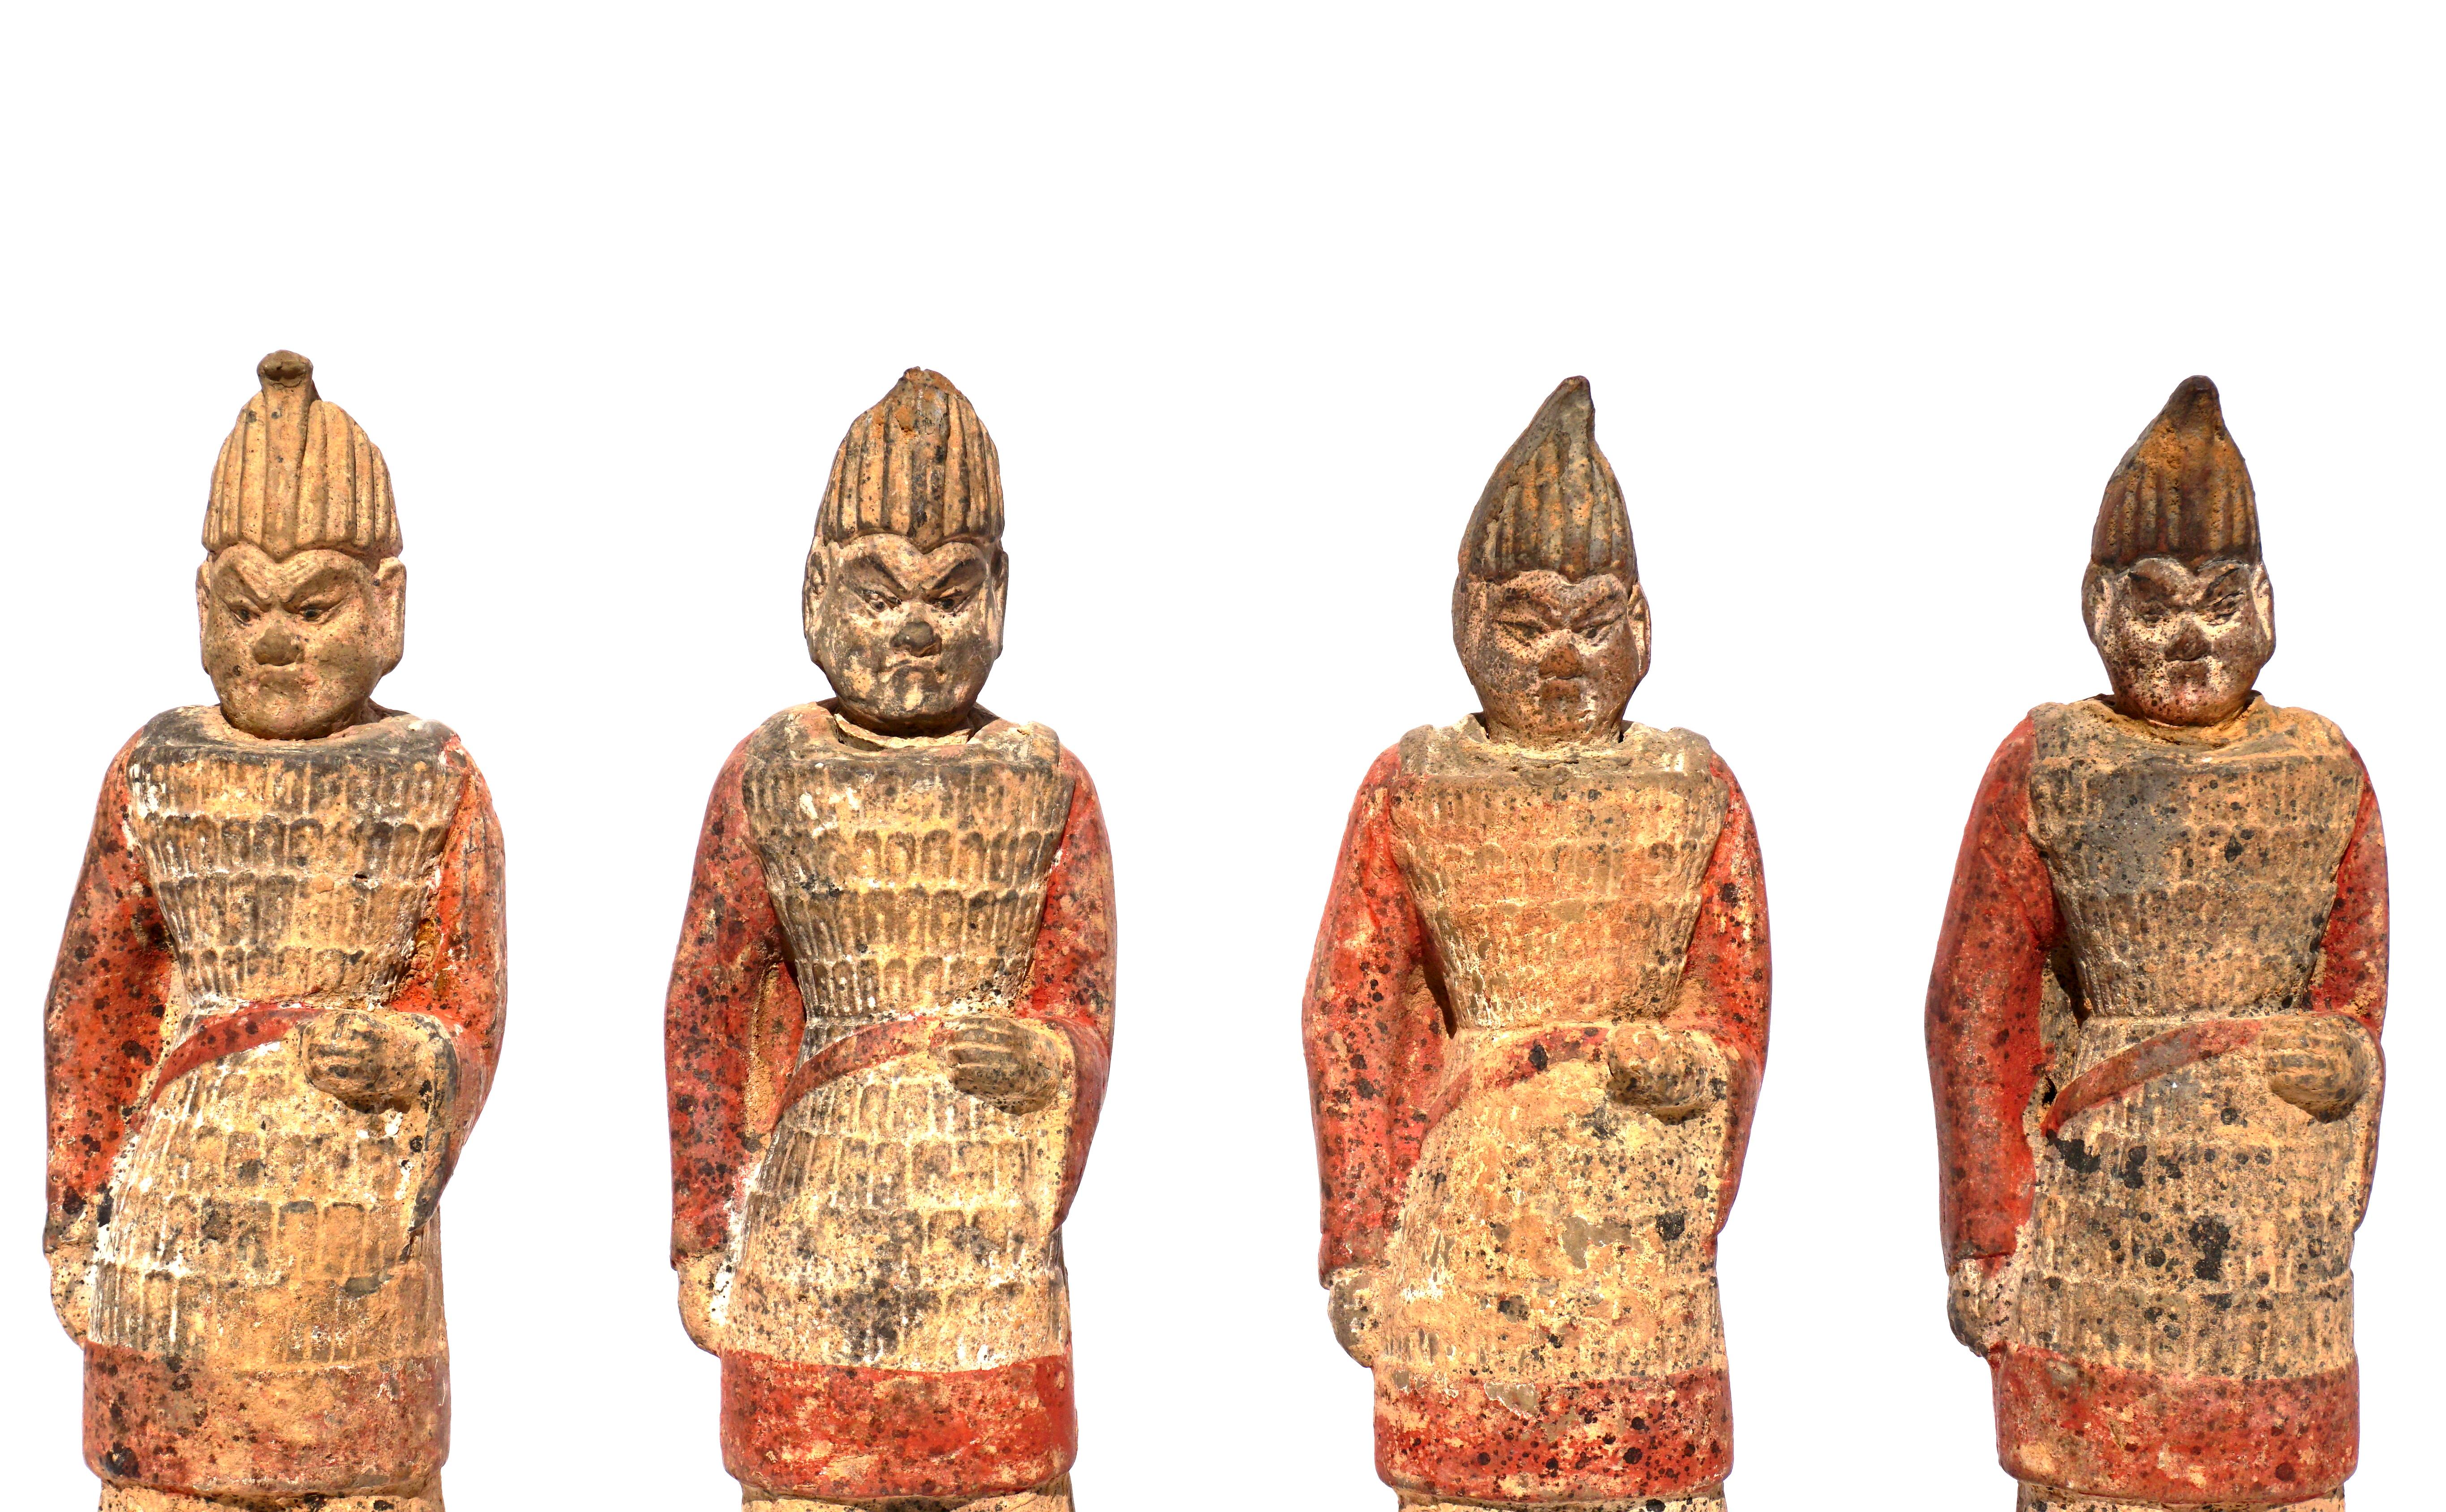 Sui Dynasty Military Guard Attendant (Set of four)

Terracotta earthenware with applied polychrome paint. These tomb guards are wearing intricate military attire with chain mail vests and originally had wooden spears or swords.

Measures: Height 9